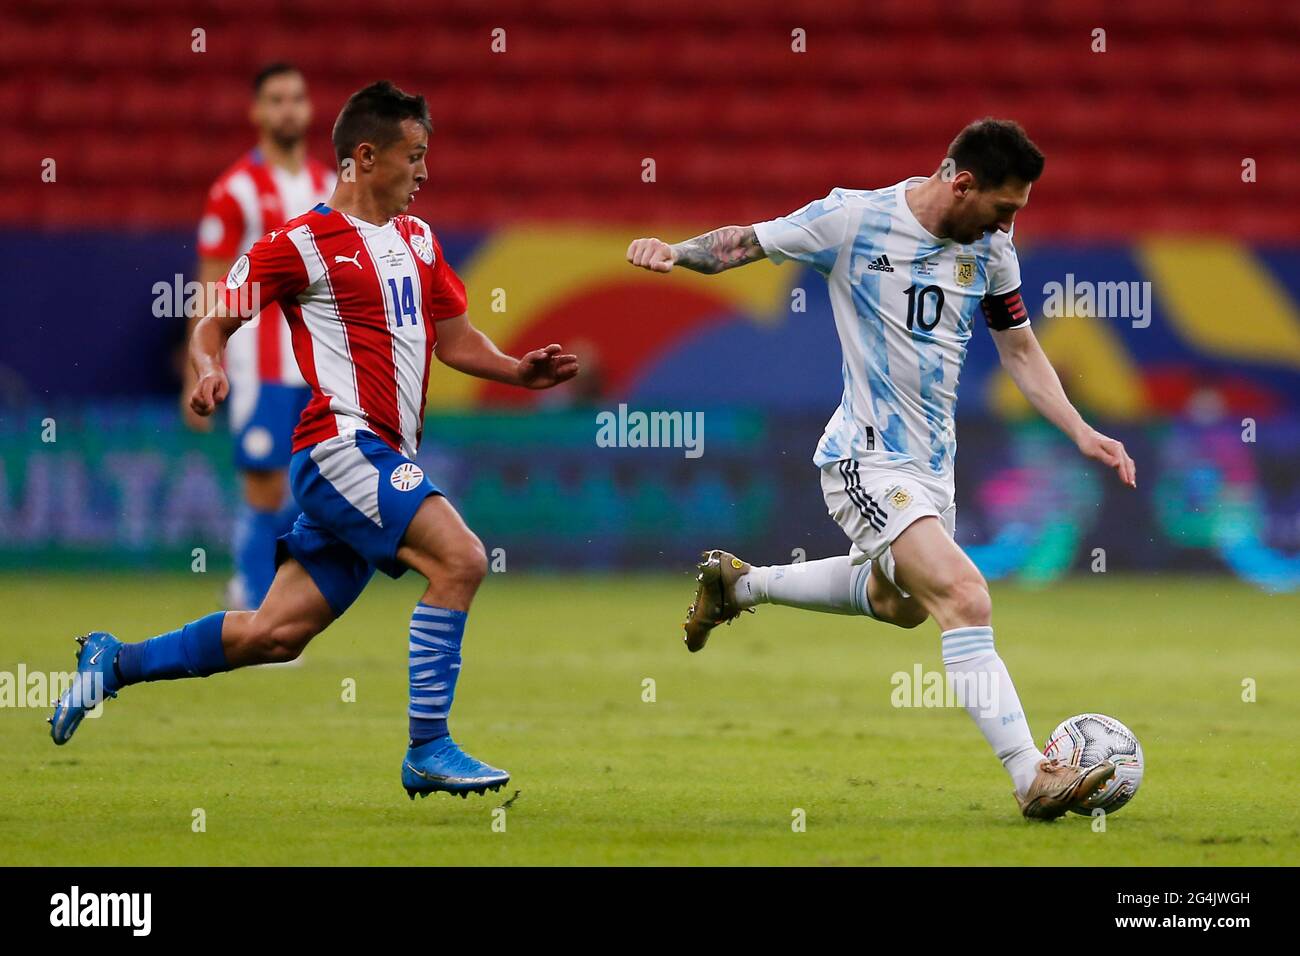 Brasilia, Brazil. 21st June, 2021. Lionel Messi (R) of Argentina competes during the 2021 Copa America group A football match between Argentina and Paraguay in Brasilia, Brazil, on June 21, 2021. Credit: Lucio Tavora/Xinhua/Alamy Live News Stock Photo